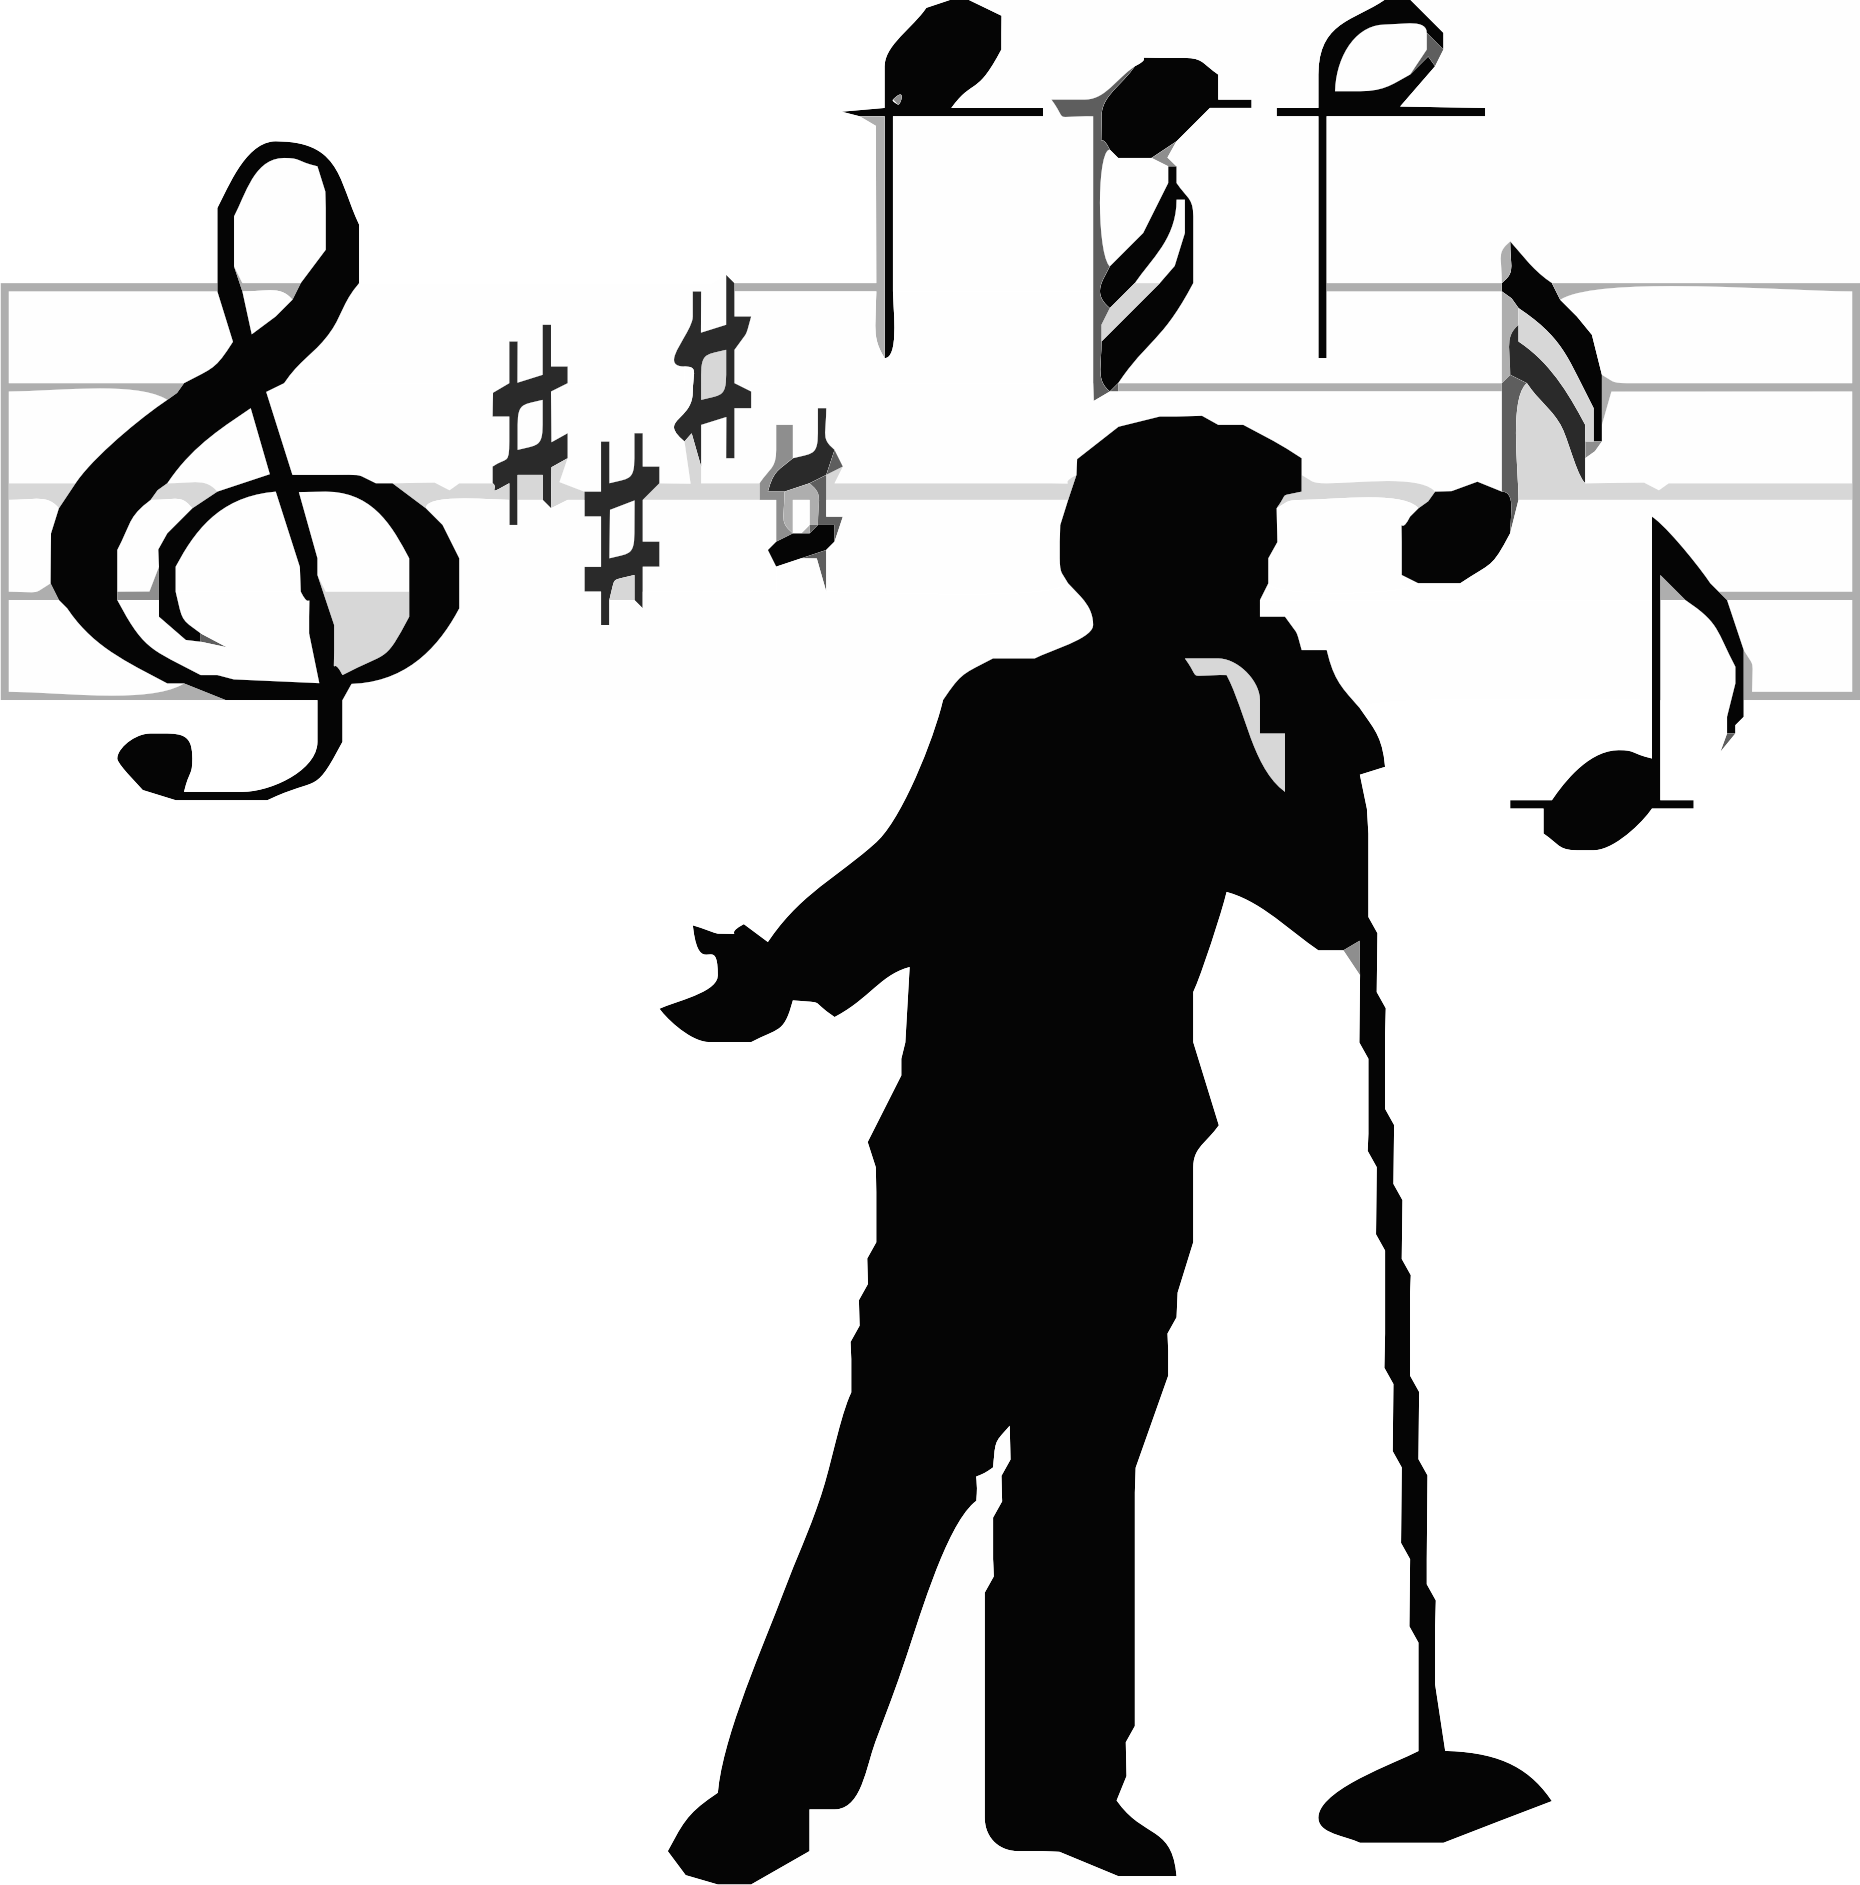 Clip Arts Related To : male singer silhouette. view all Singer Silhouette C...